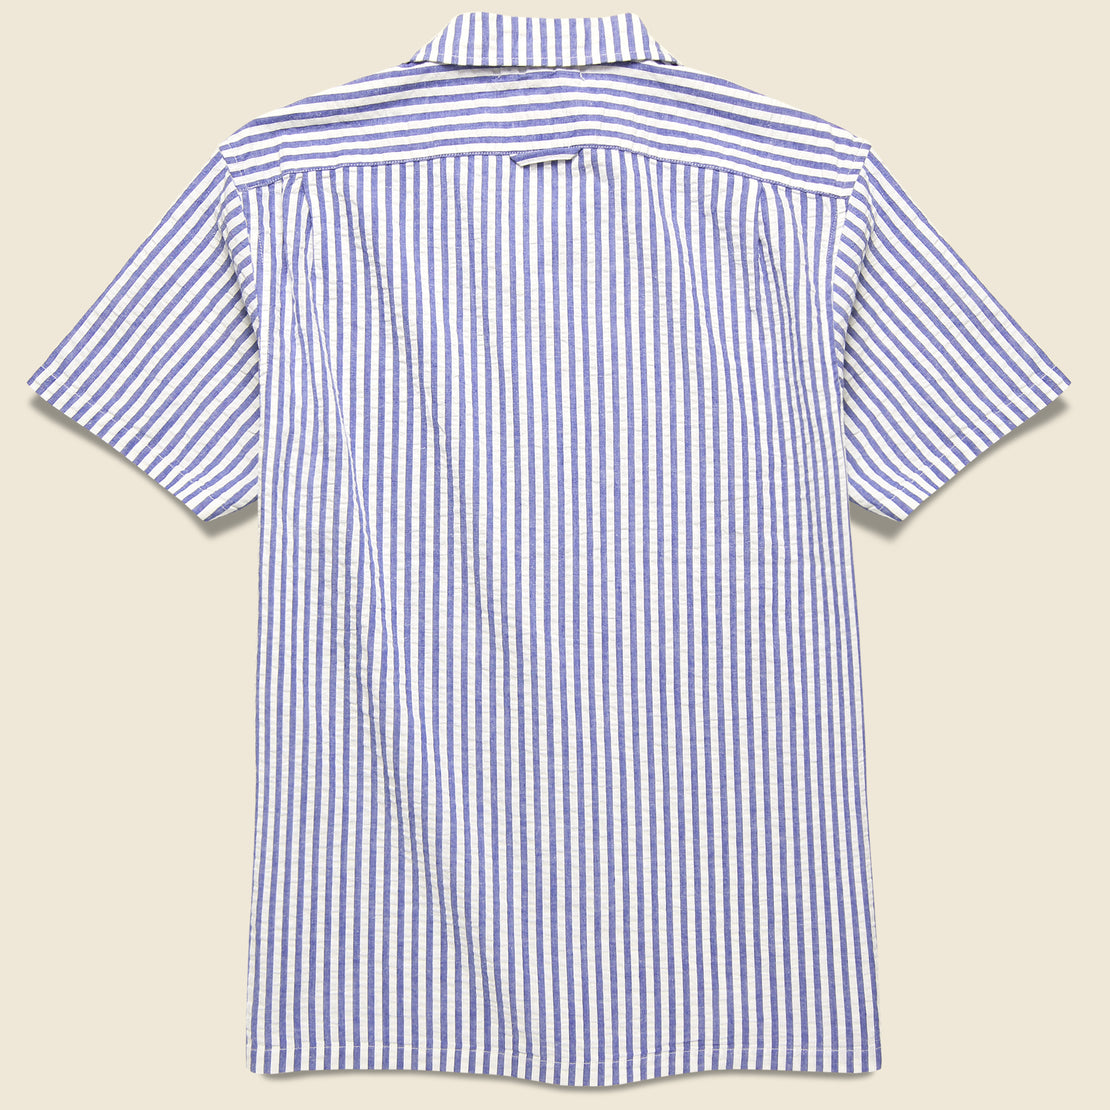 Seersucker Camp Shirt - Blue/White Stripes - Alex Mill - STAG Provisions - Tops - S/S Woven - Other Pattern